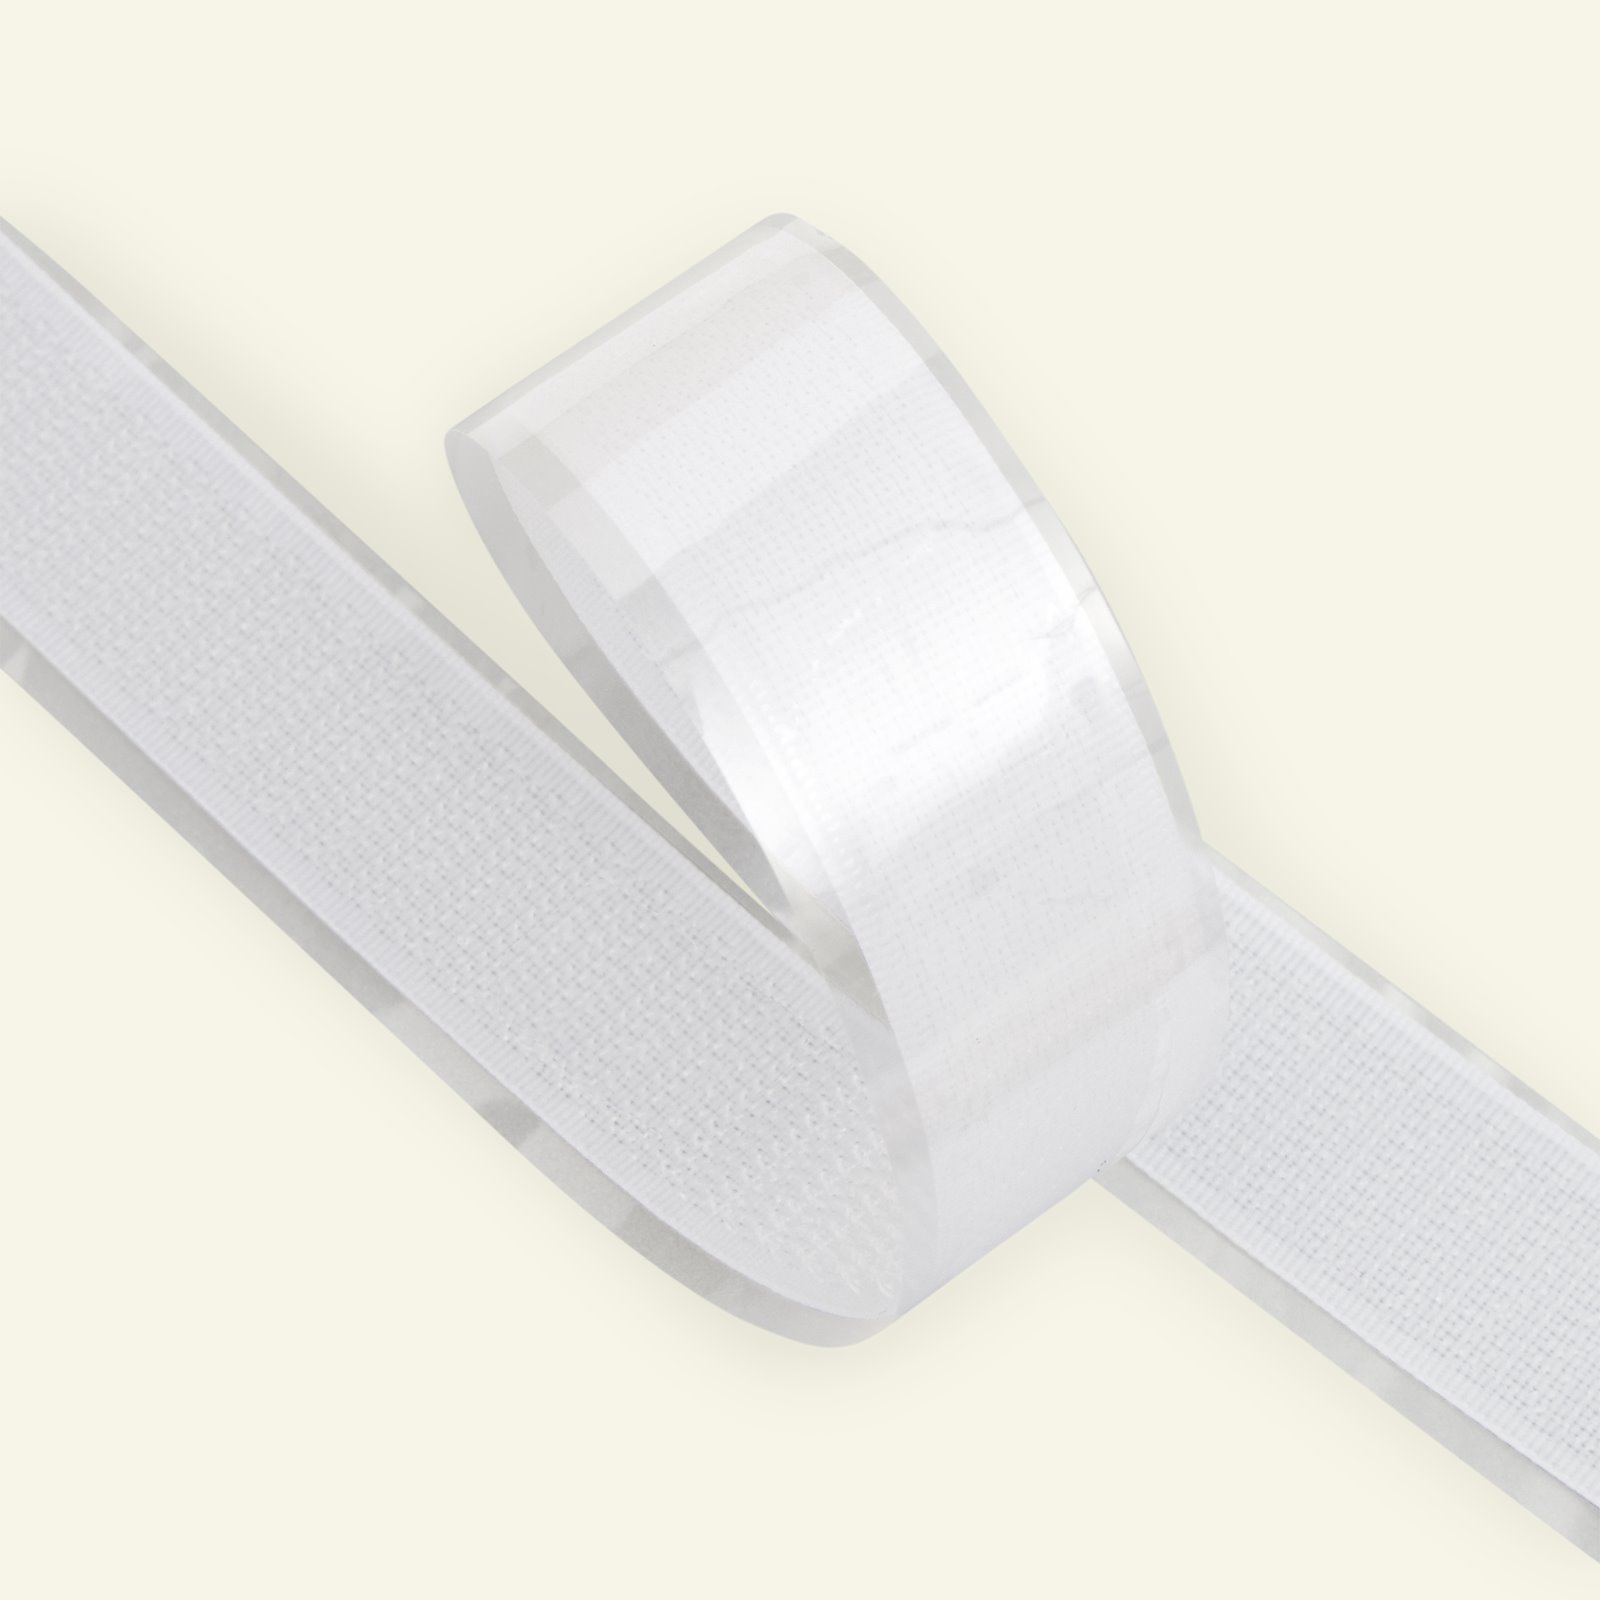 Self-adhesive Hook tape 20mm white 25m 30200_pack